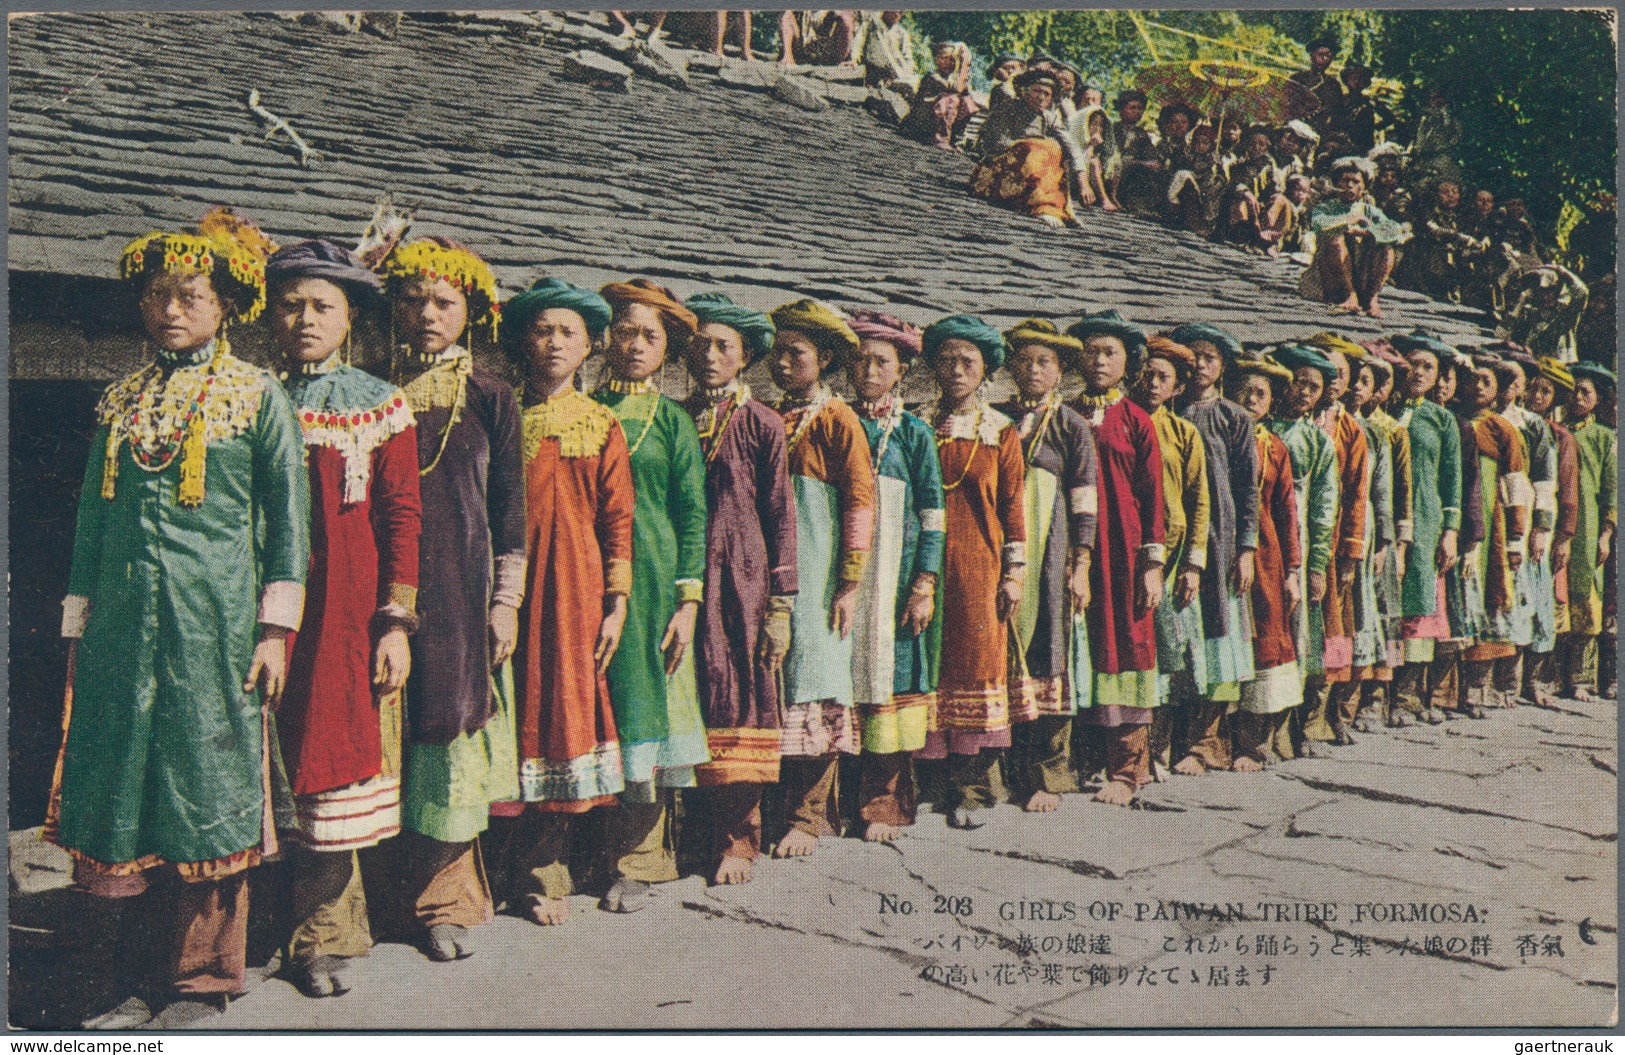 China - Taiwan (Formosa): Taiwan, 1937/40, ppc (4) all real used and showing colour views of aborigi